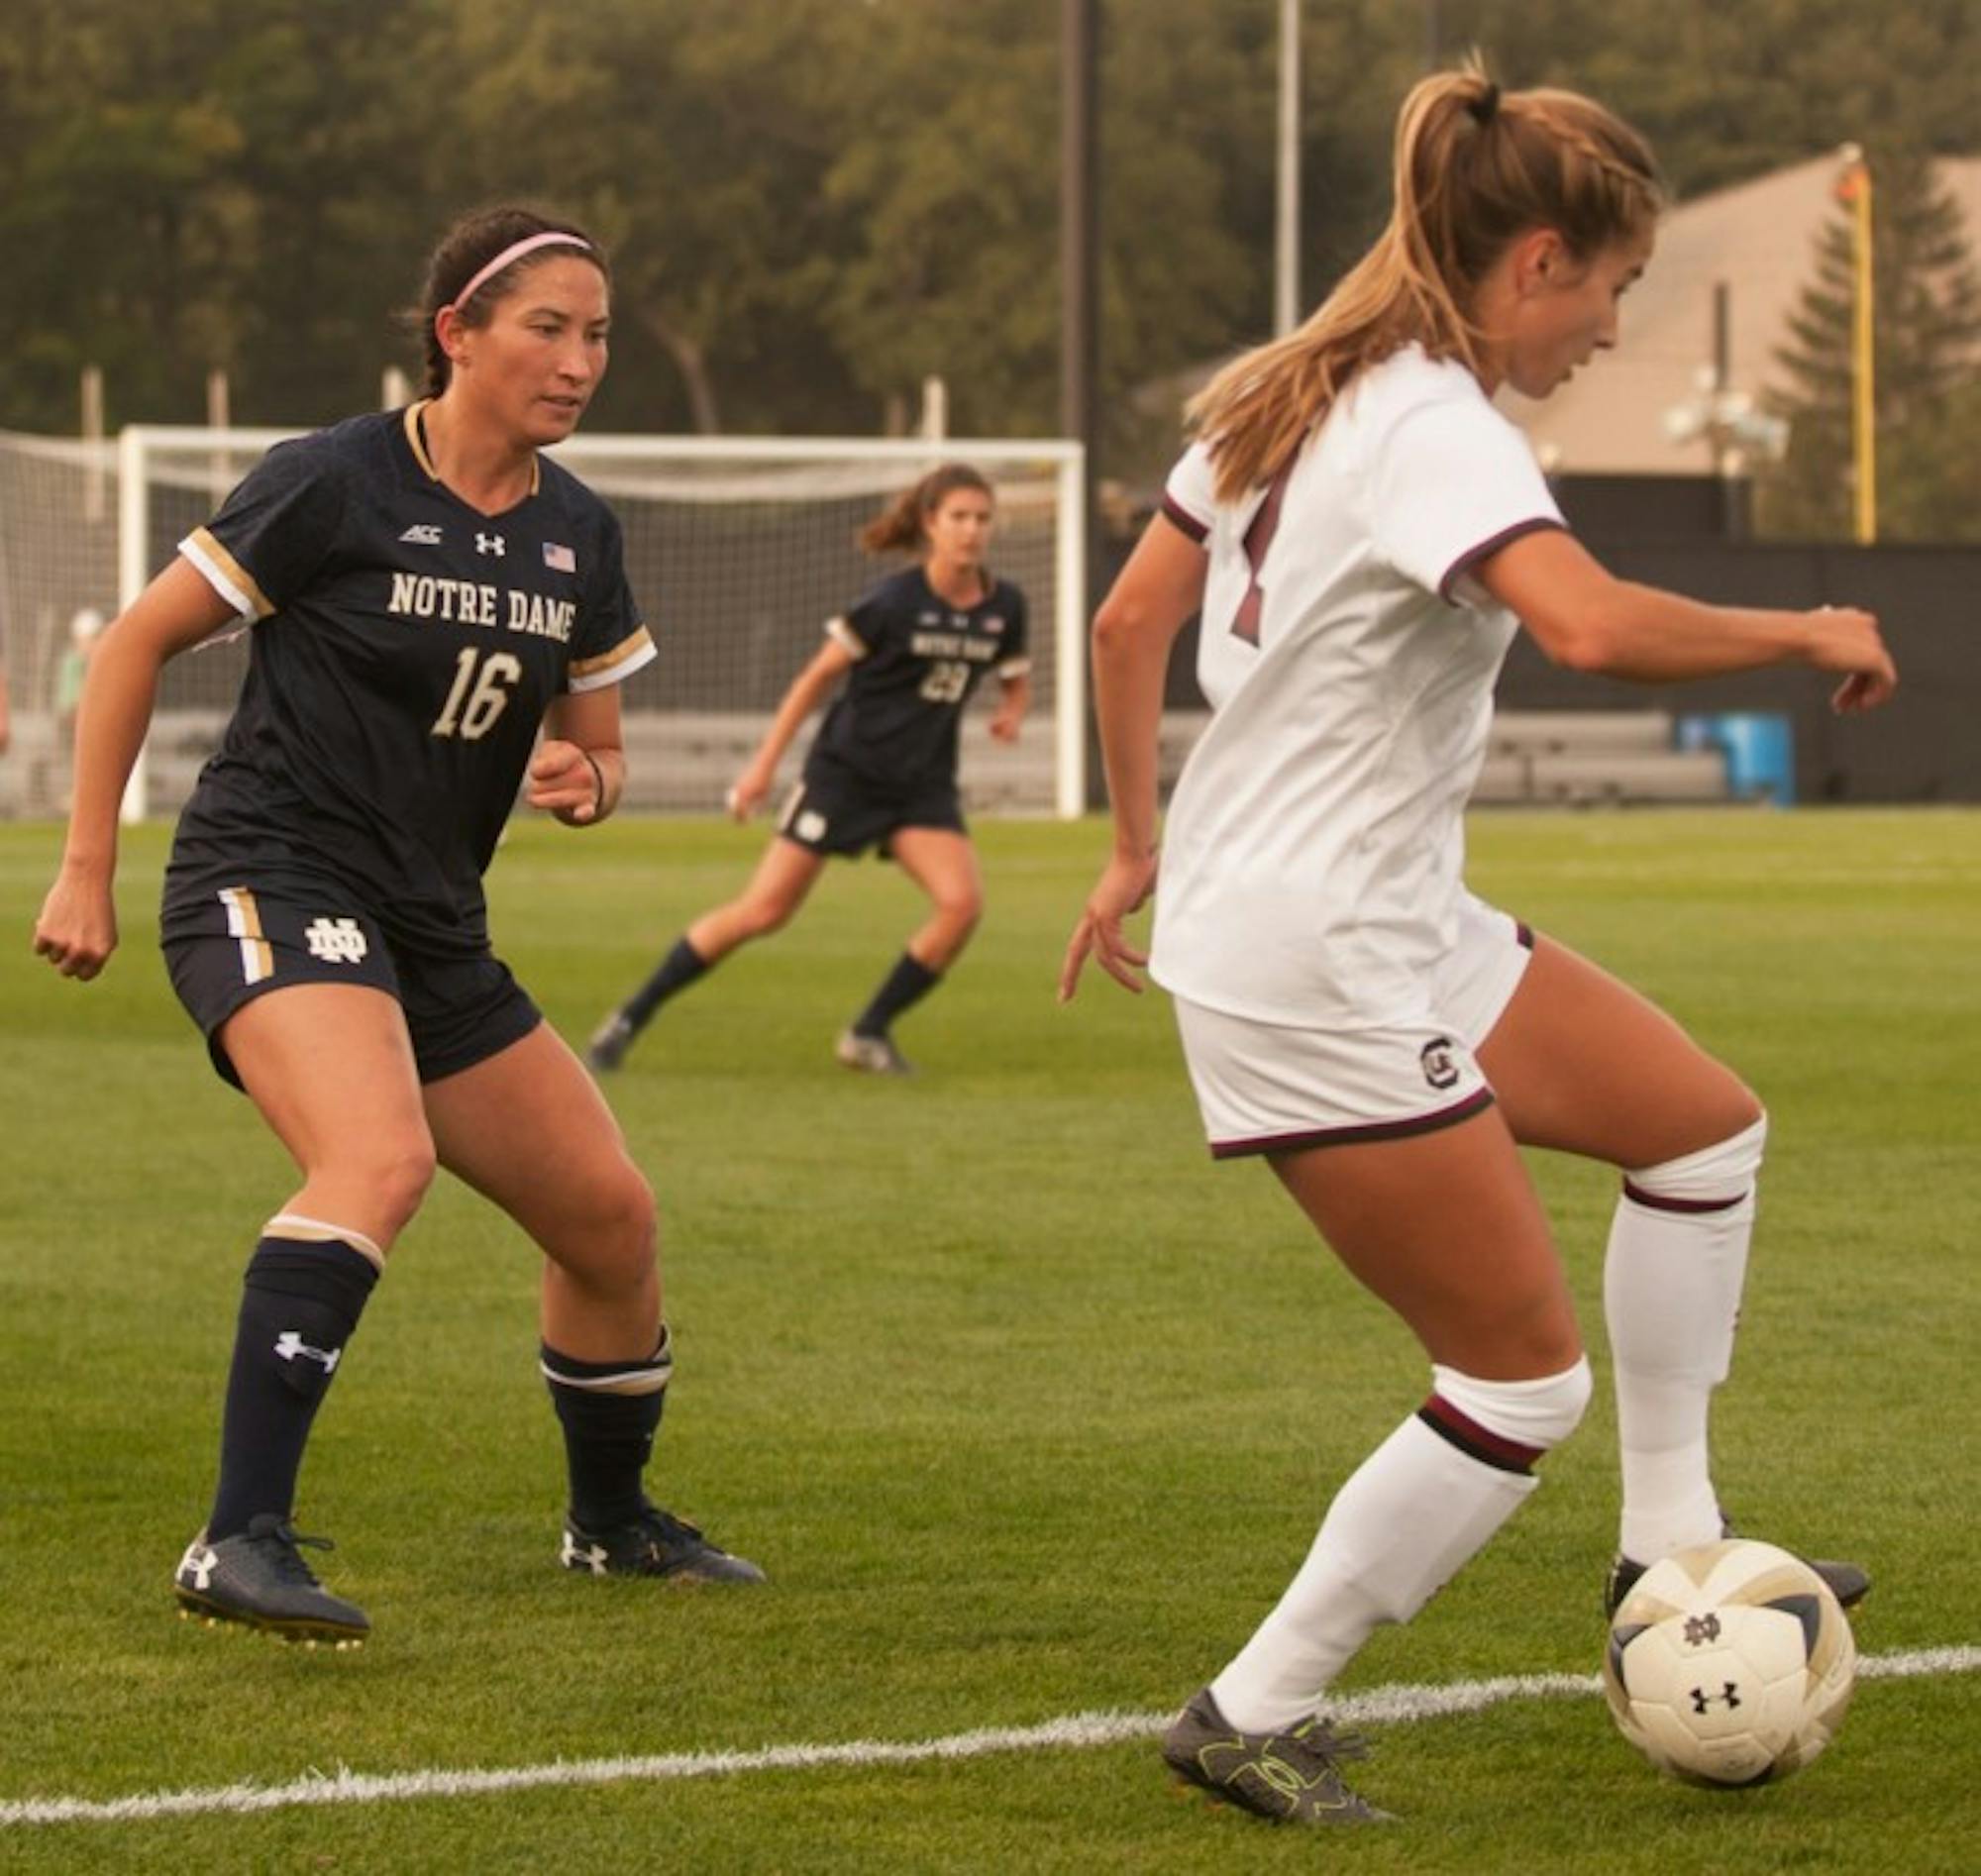 Irish graduate student midfielder Sandra Yu defends an opponent during Notre Dame's 1-0 double-overtime loss to South Carolina on Sept. 1 at Alumni Stadium.